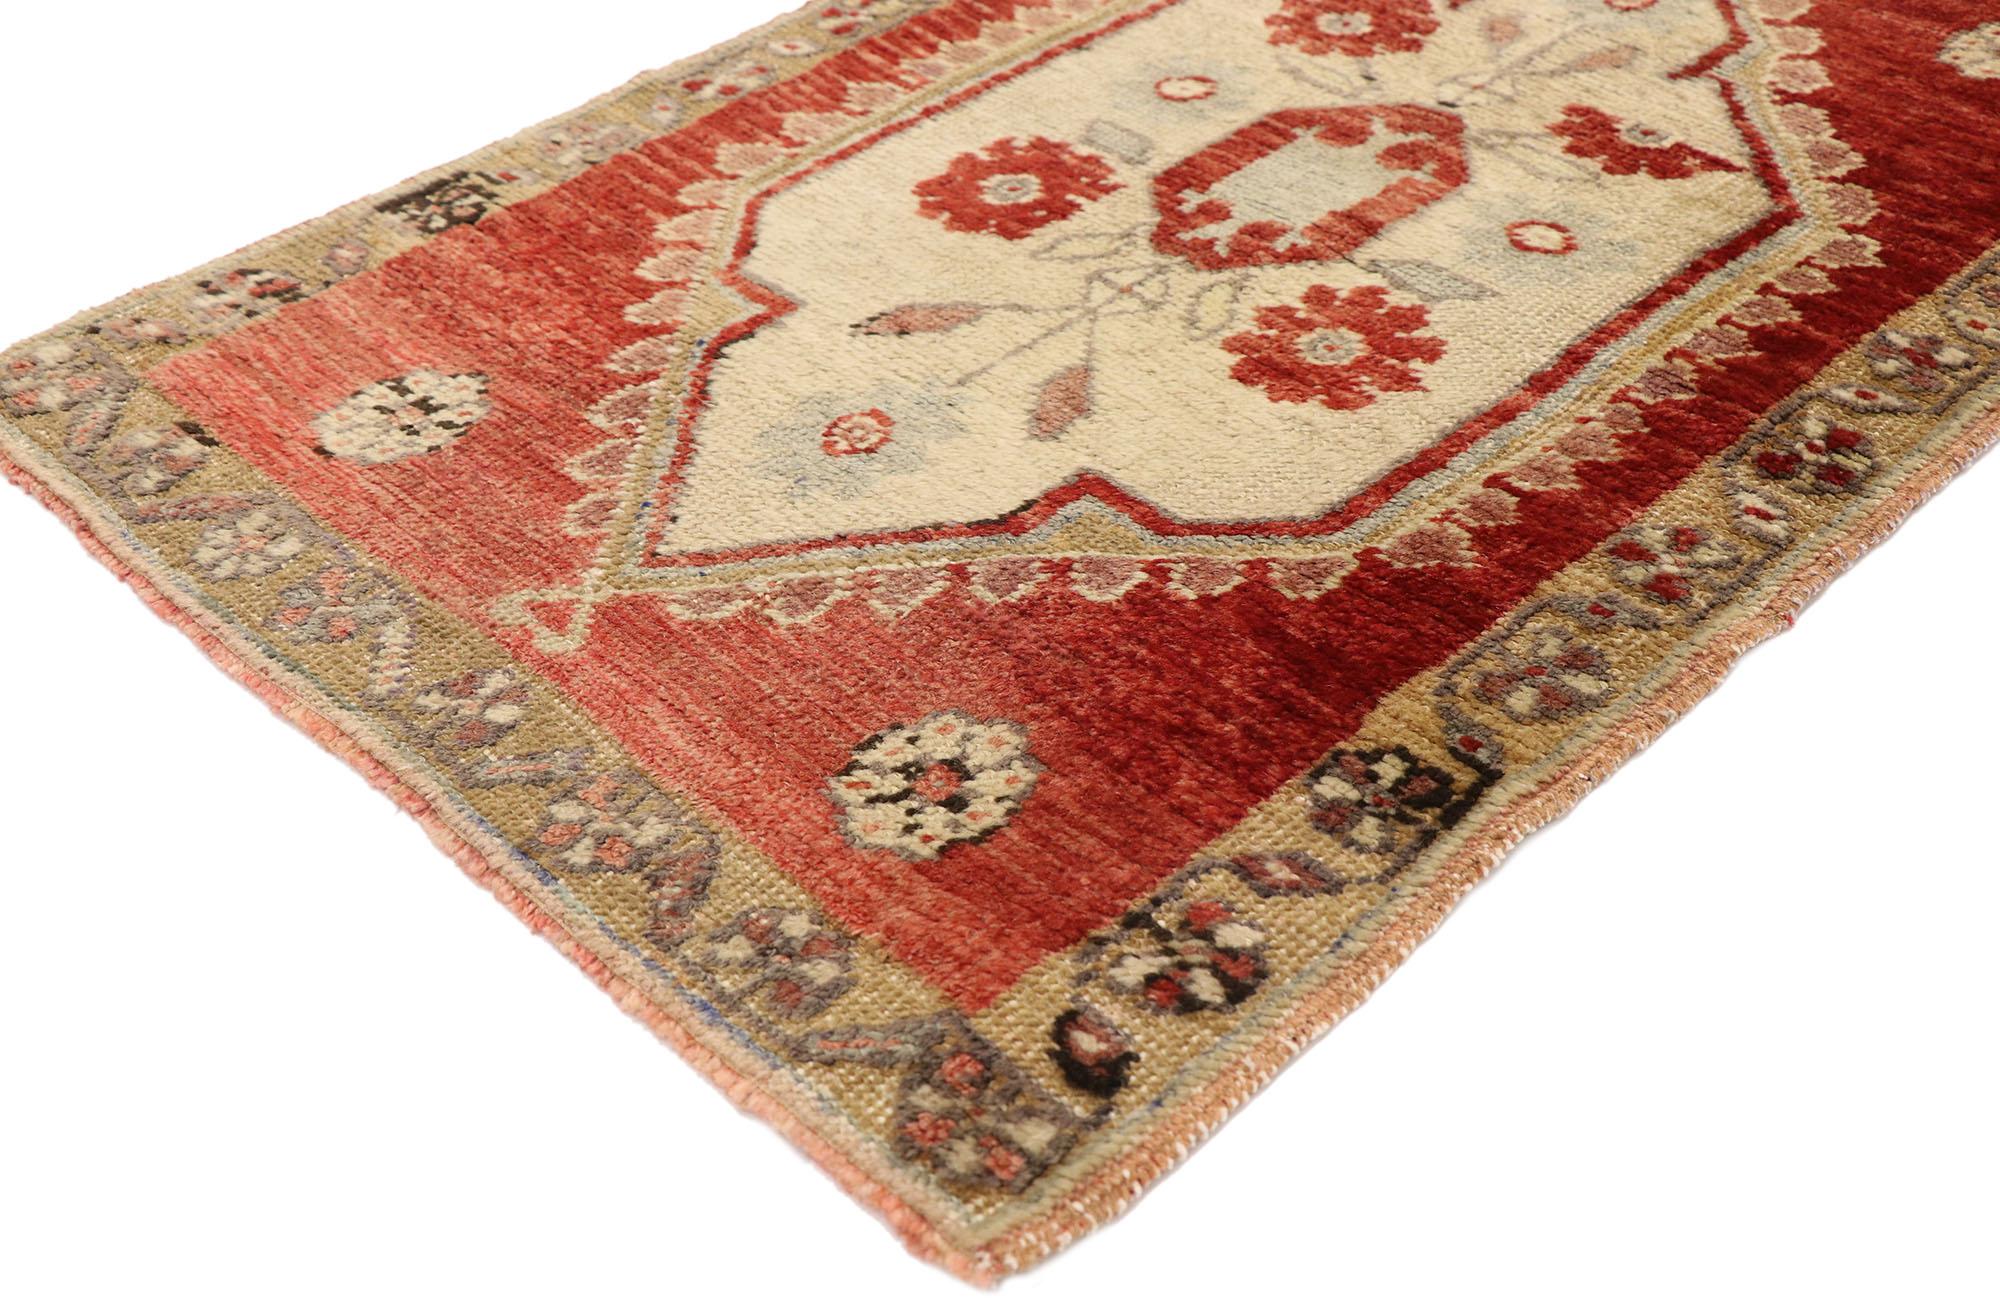 51773 vintage Turkish Oushak Accent rug. This vintage Turkish Oushak rug features a modern traditional style. Immersed in Anatolian history and refined colors, this vintage Oushak rug combines simplicity with sophistication. Impeccably made from